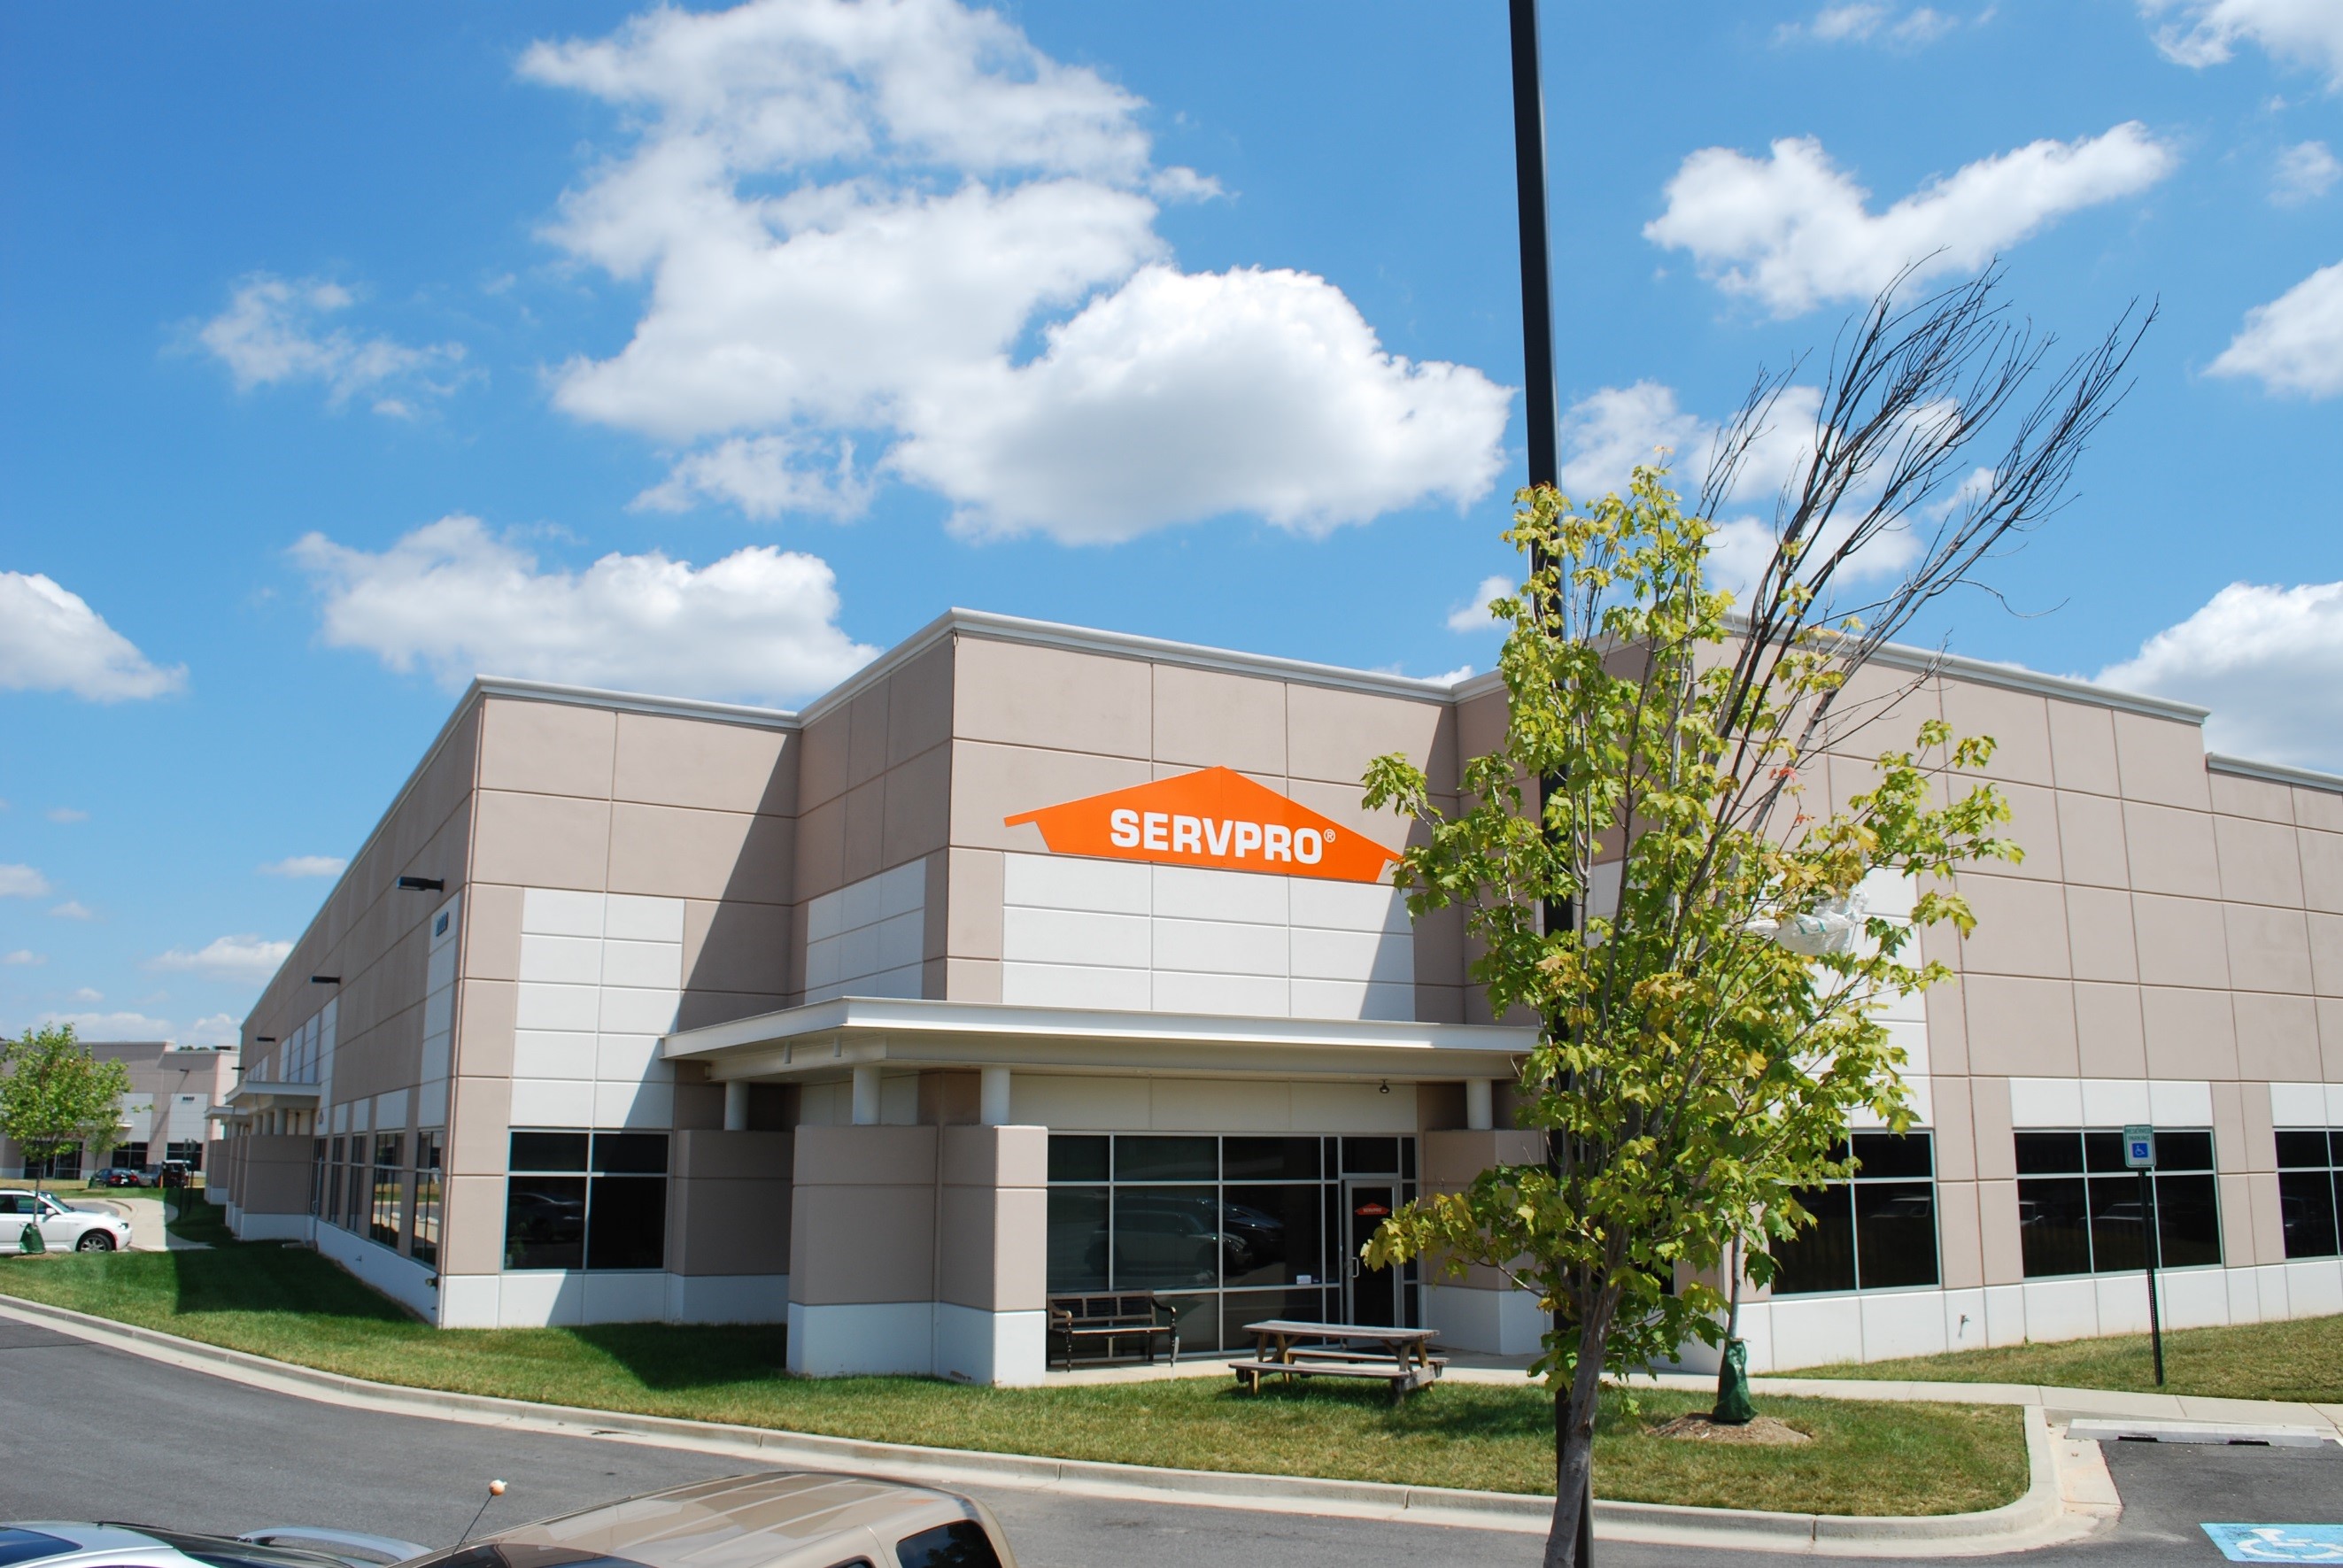 SERVPRO® Fire & Water Damage Cleanup and Restoration Building